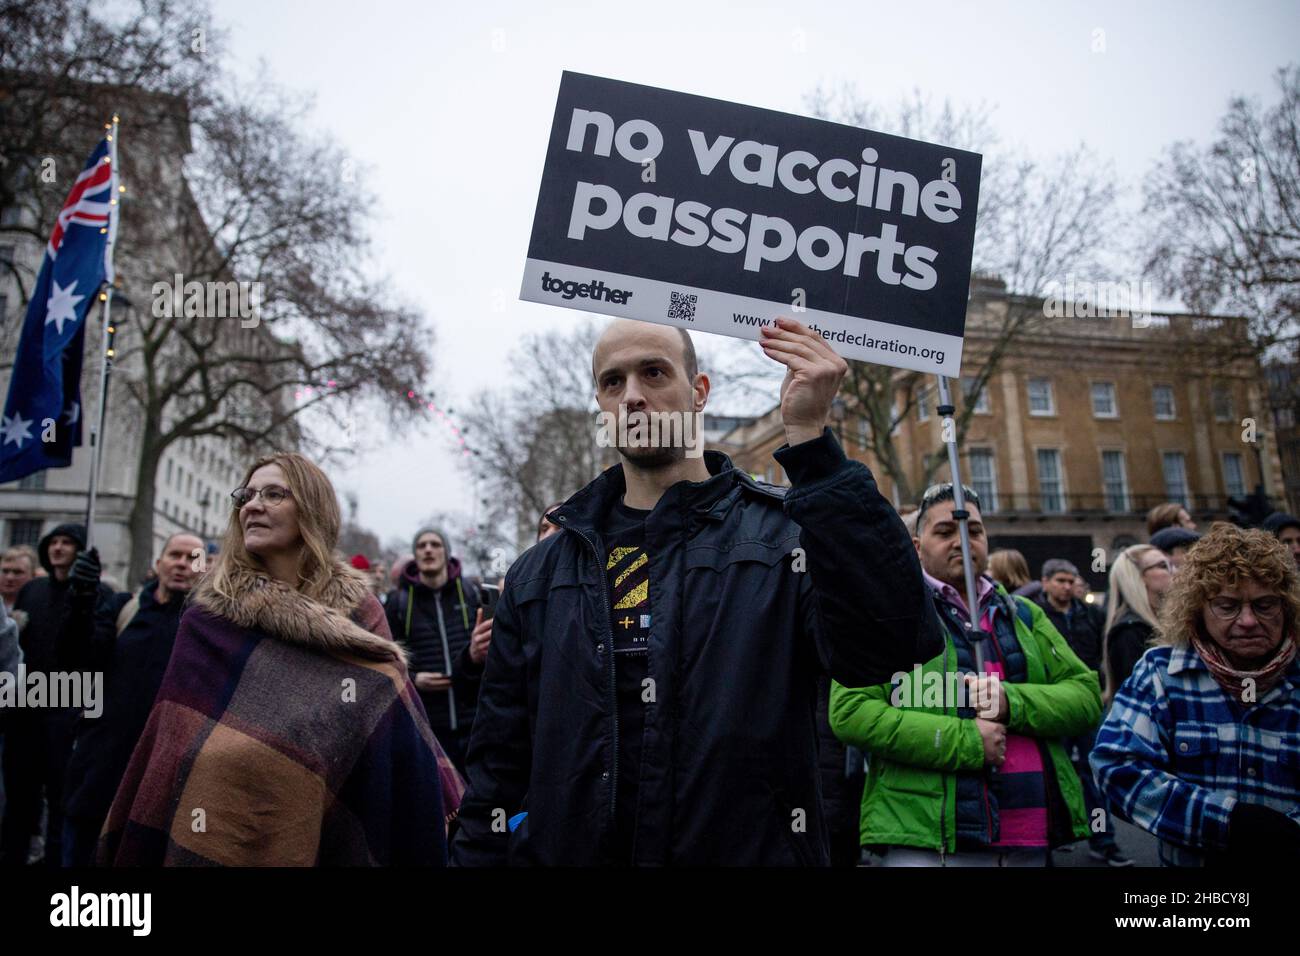 A protester is seen holding a placard of "no vaccine passports" during the demonstration. Following the introduction of covid 19 vaccination passport as part of the measures to limit the spread of Omicron covid 19 variant in the UK last week, people walk on the street to protest against the mandatory covid 19 vaccination and the use of covid 19 vaccination passport as part of the covid 19 restrictions. They demanded the "freedom" to choose to be vaccinated or not and not to be restricted by the covid 19 vaccination passport. Stock Photo